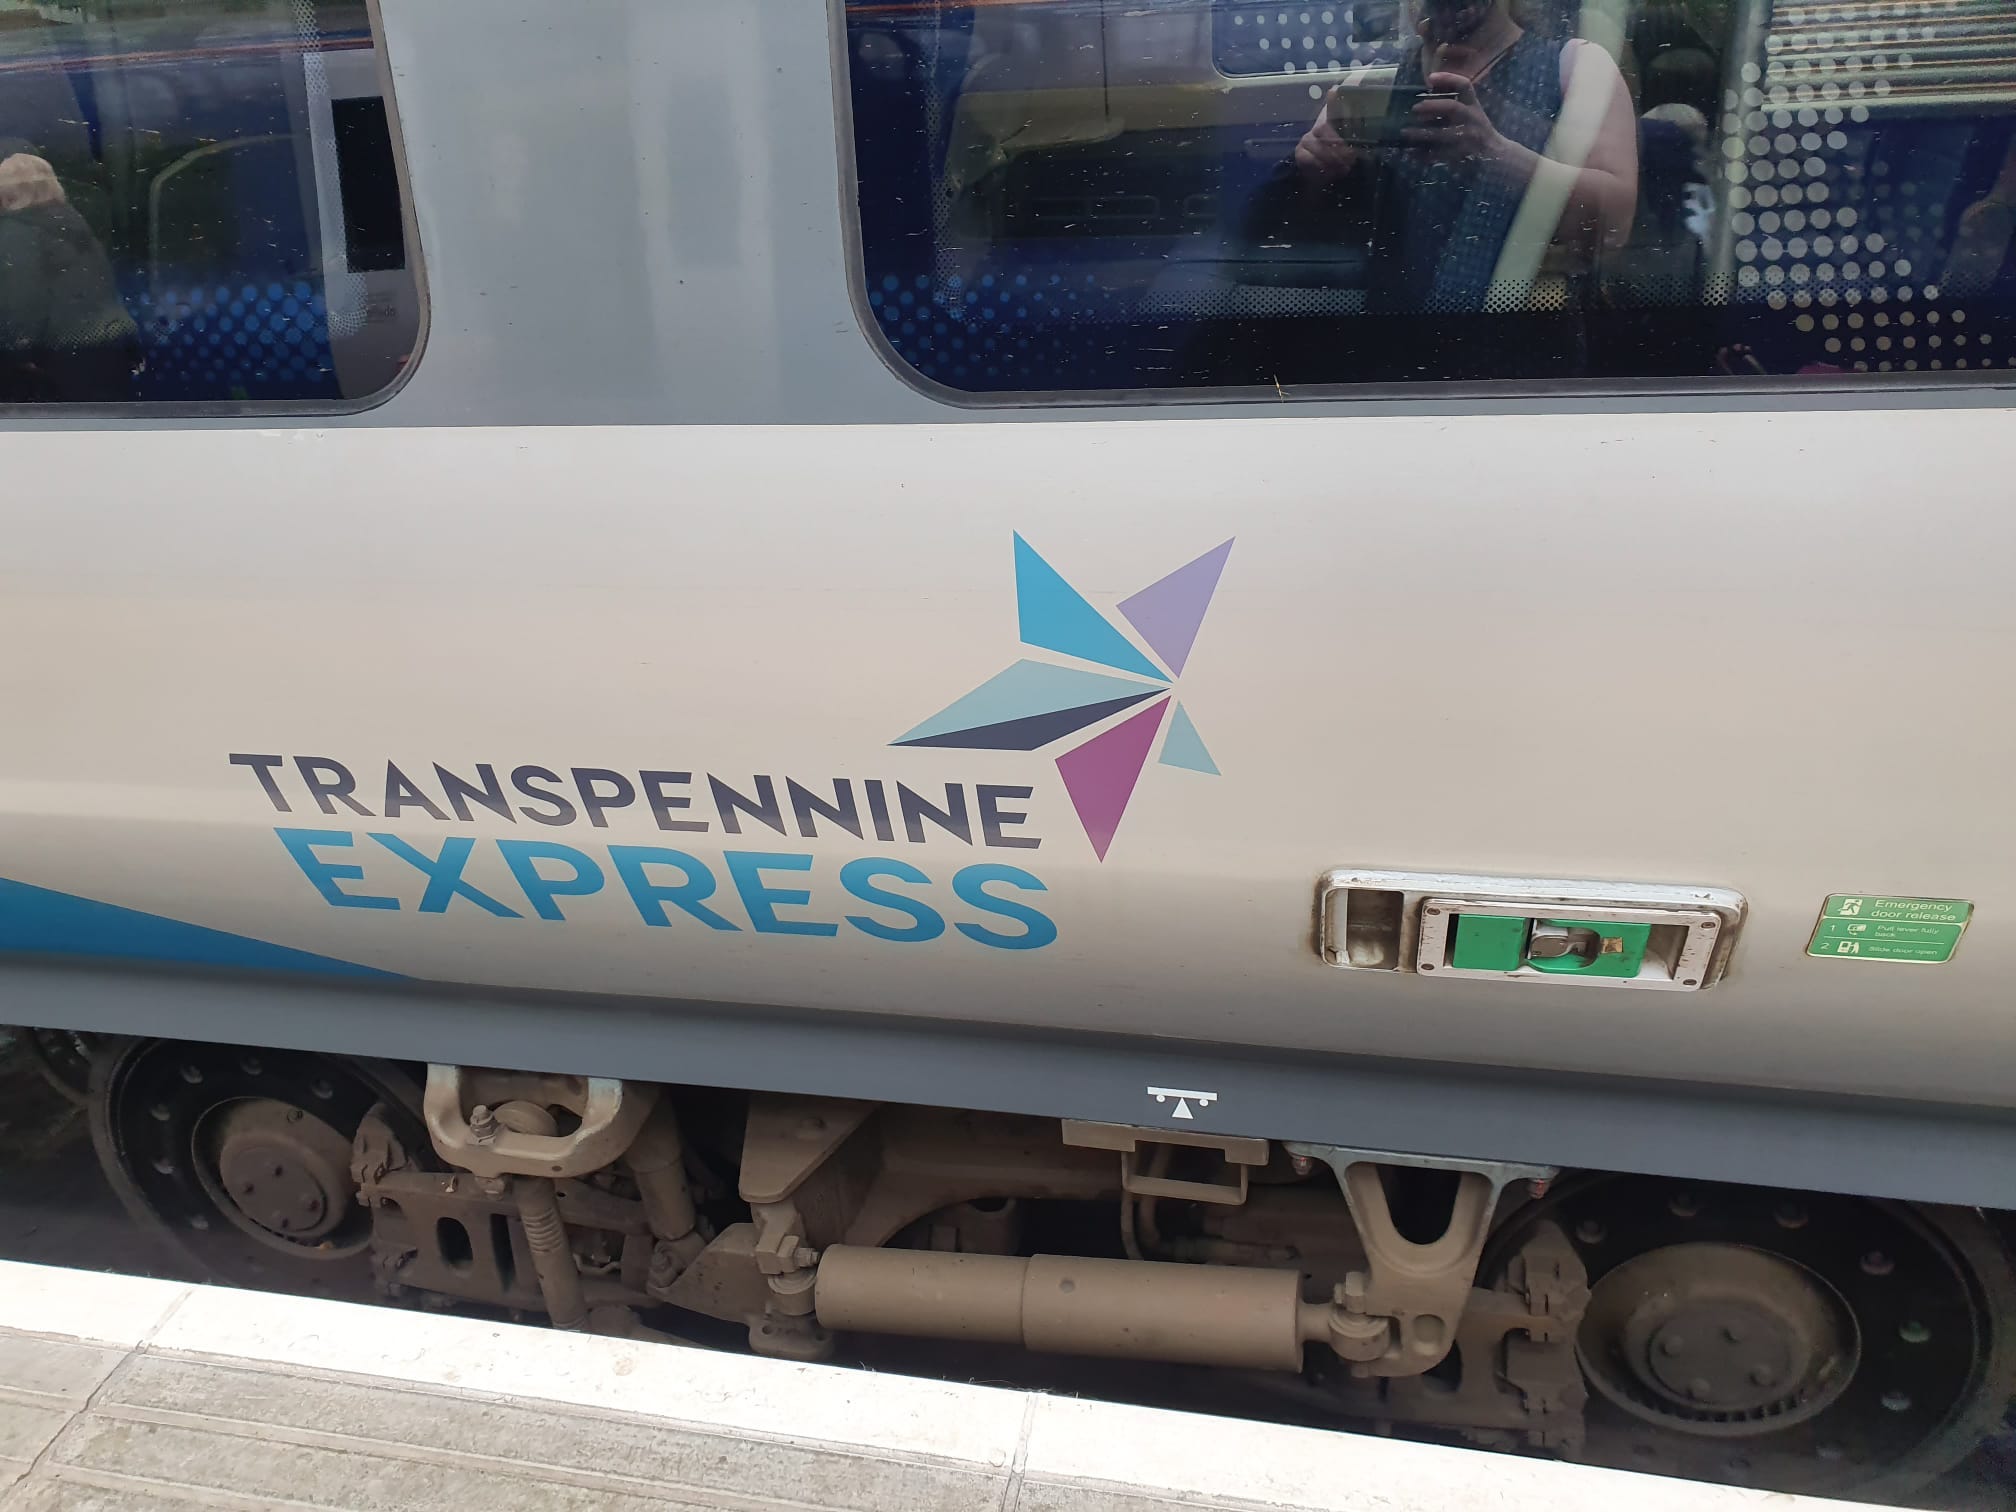 A train carriage, with the words "Transpennine Express" and a blue and purple star on the side.